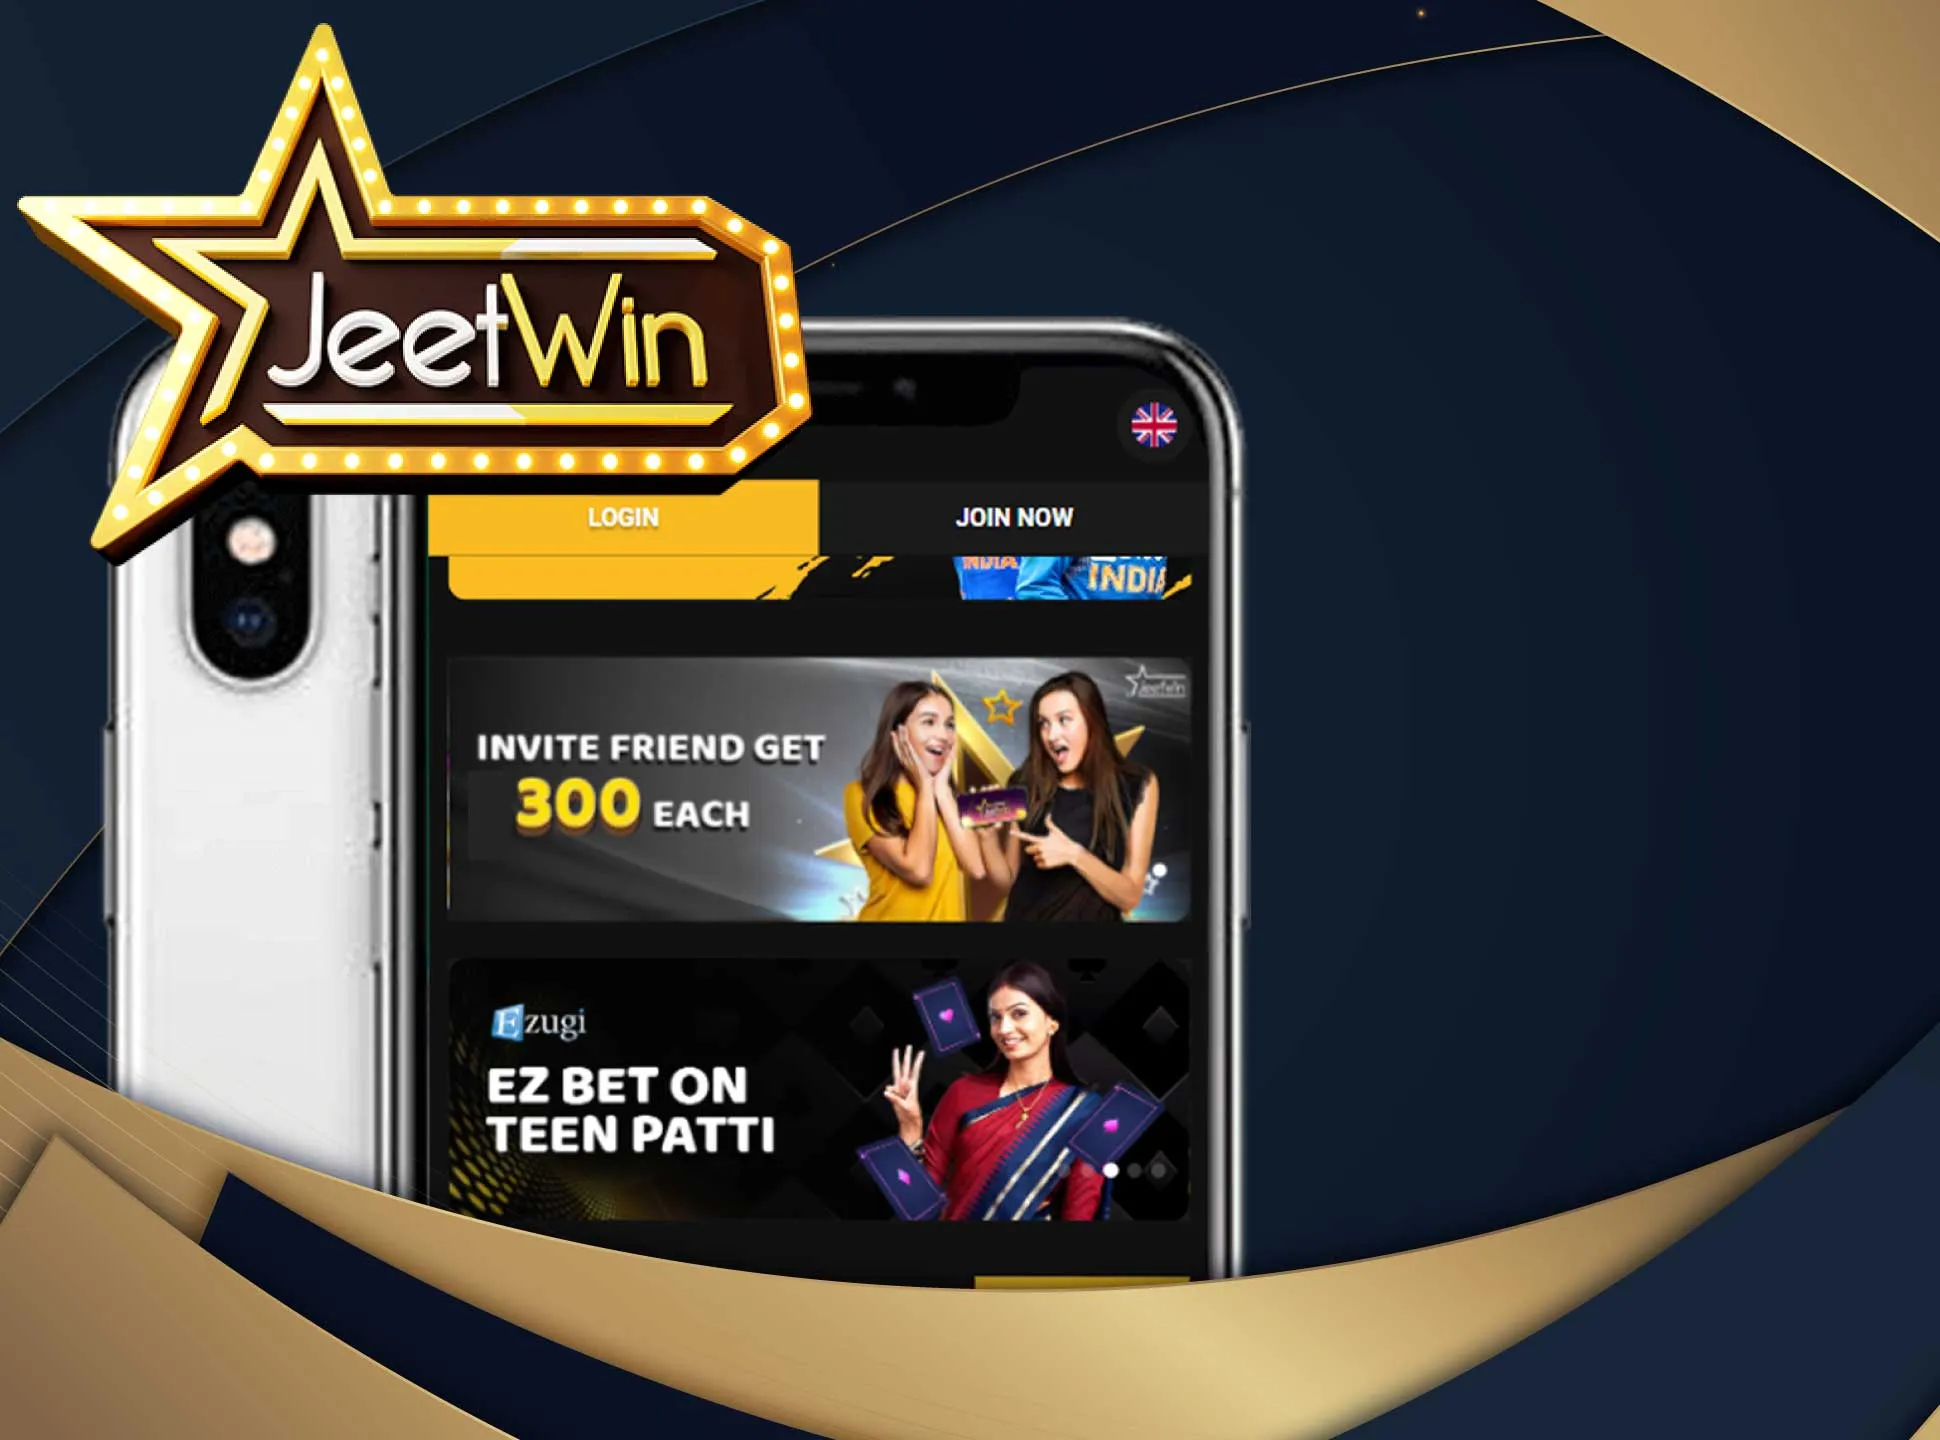 Install the Jeetwin app and start betting ana playing on your smartphone.